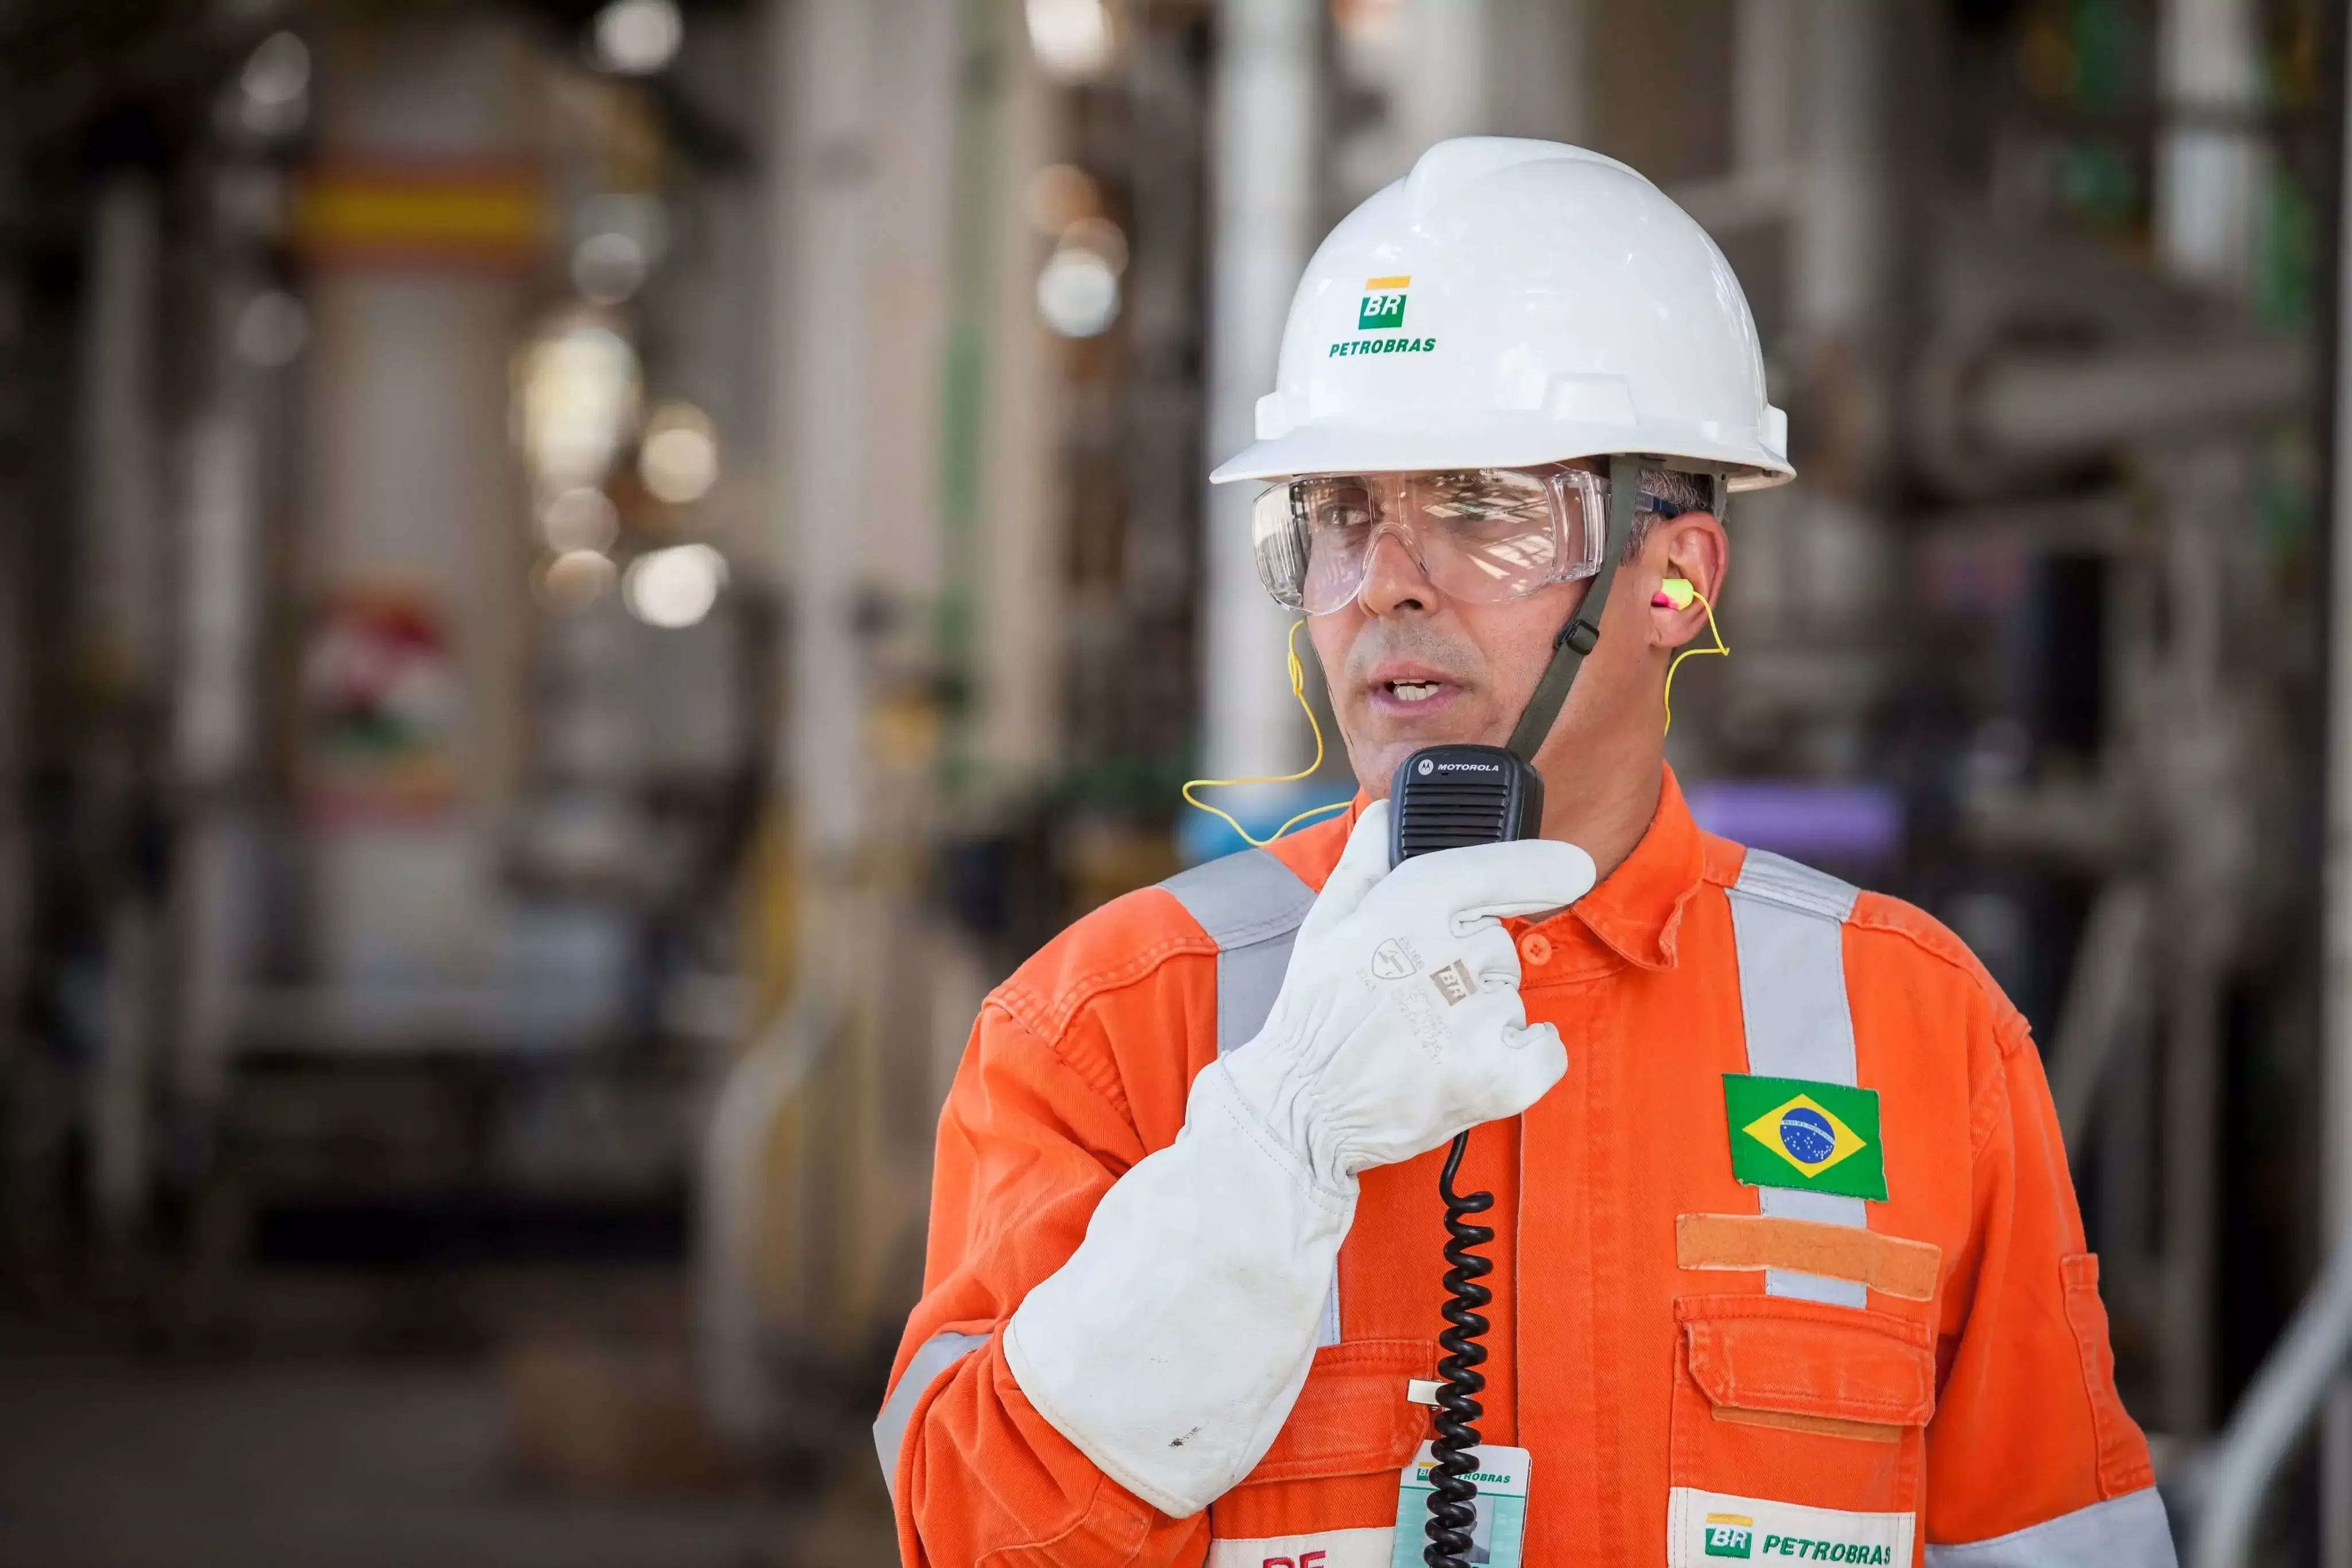 Petrobras employee wearing full personal protective equipment and talking into a walkie-talkie.